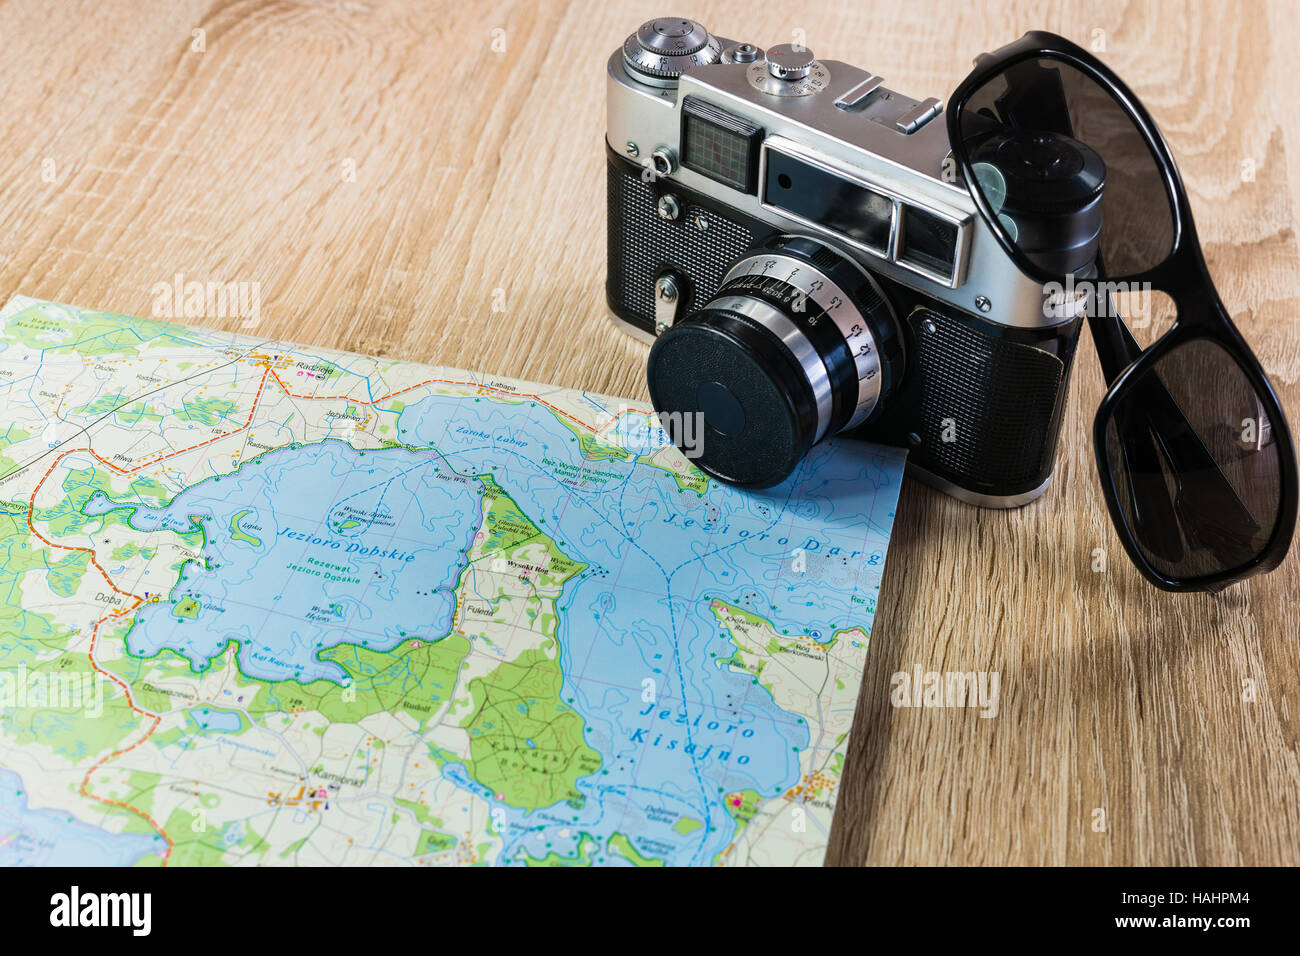 Old camera on a map of lakes in Poland. Obsolete camera on a map. Sunglasses near old camera. Stock Photo